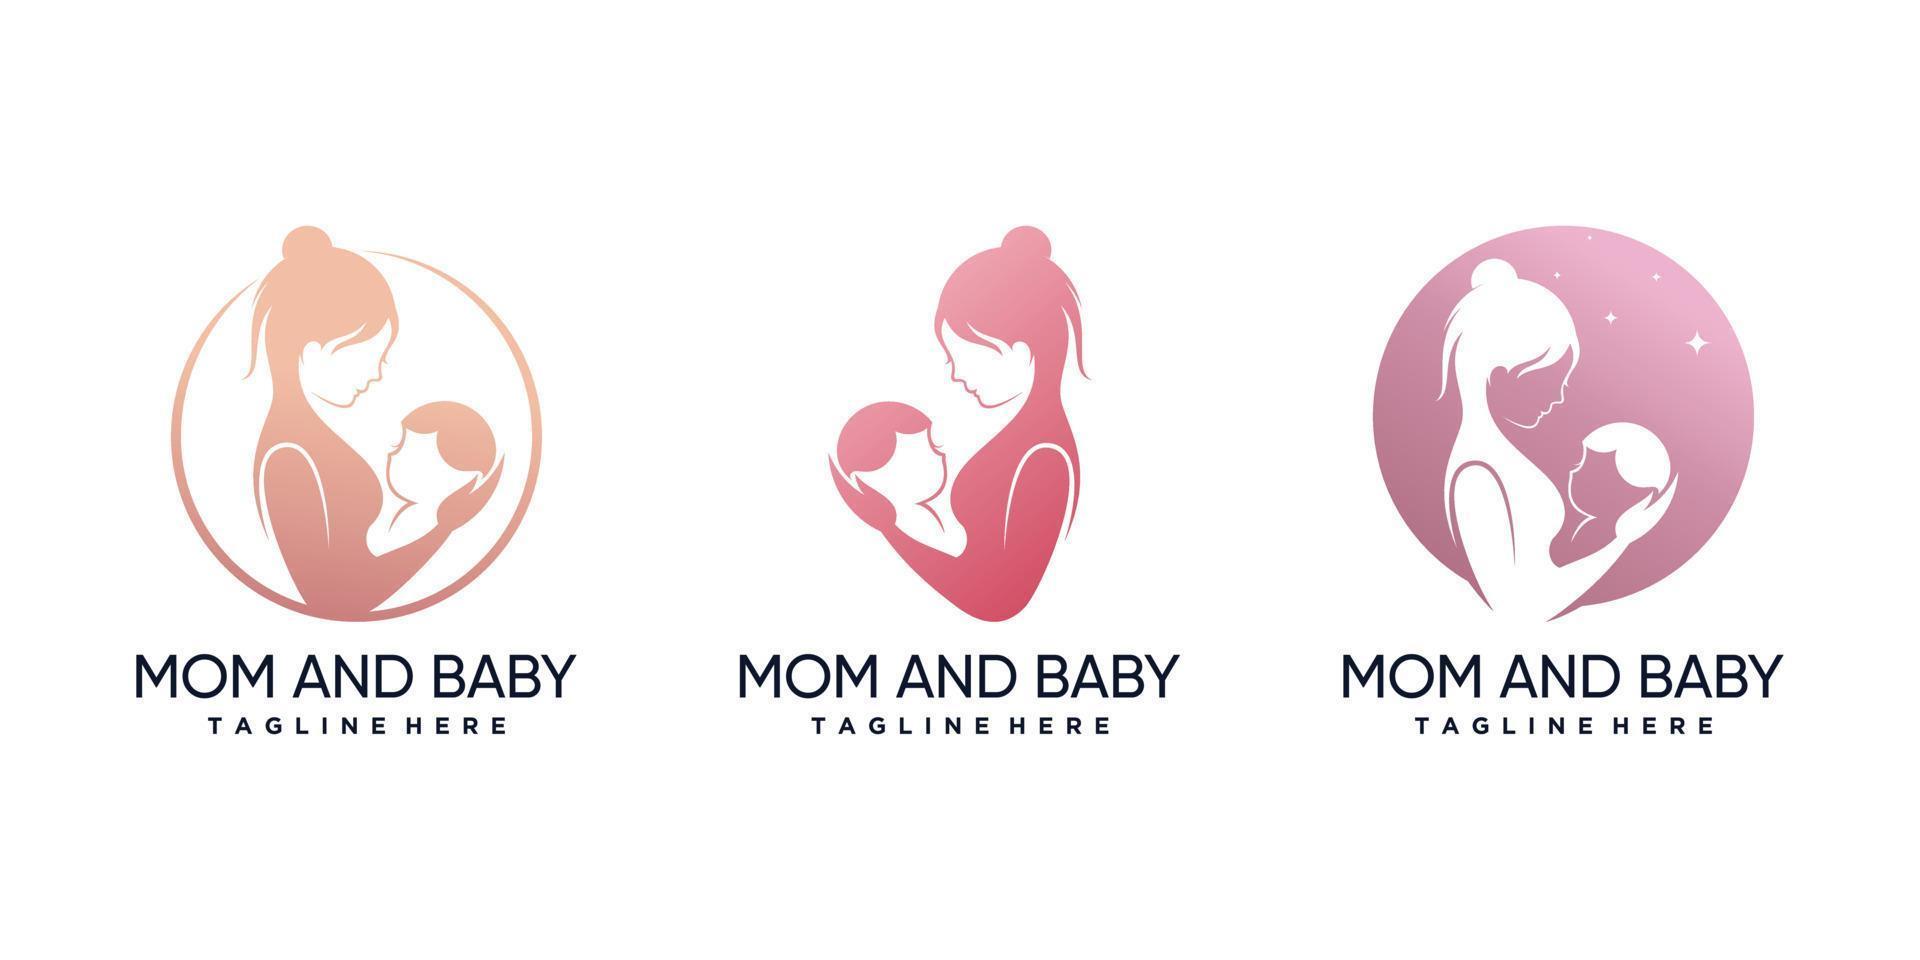 Set bundle of mom and baby logo design template with creative element Premium Vector